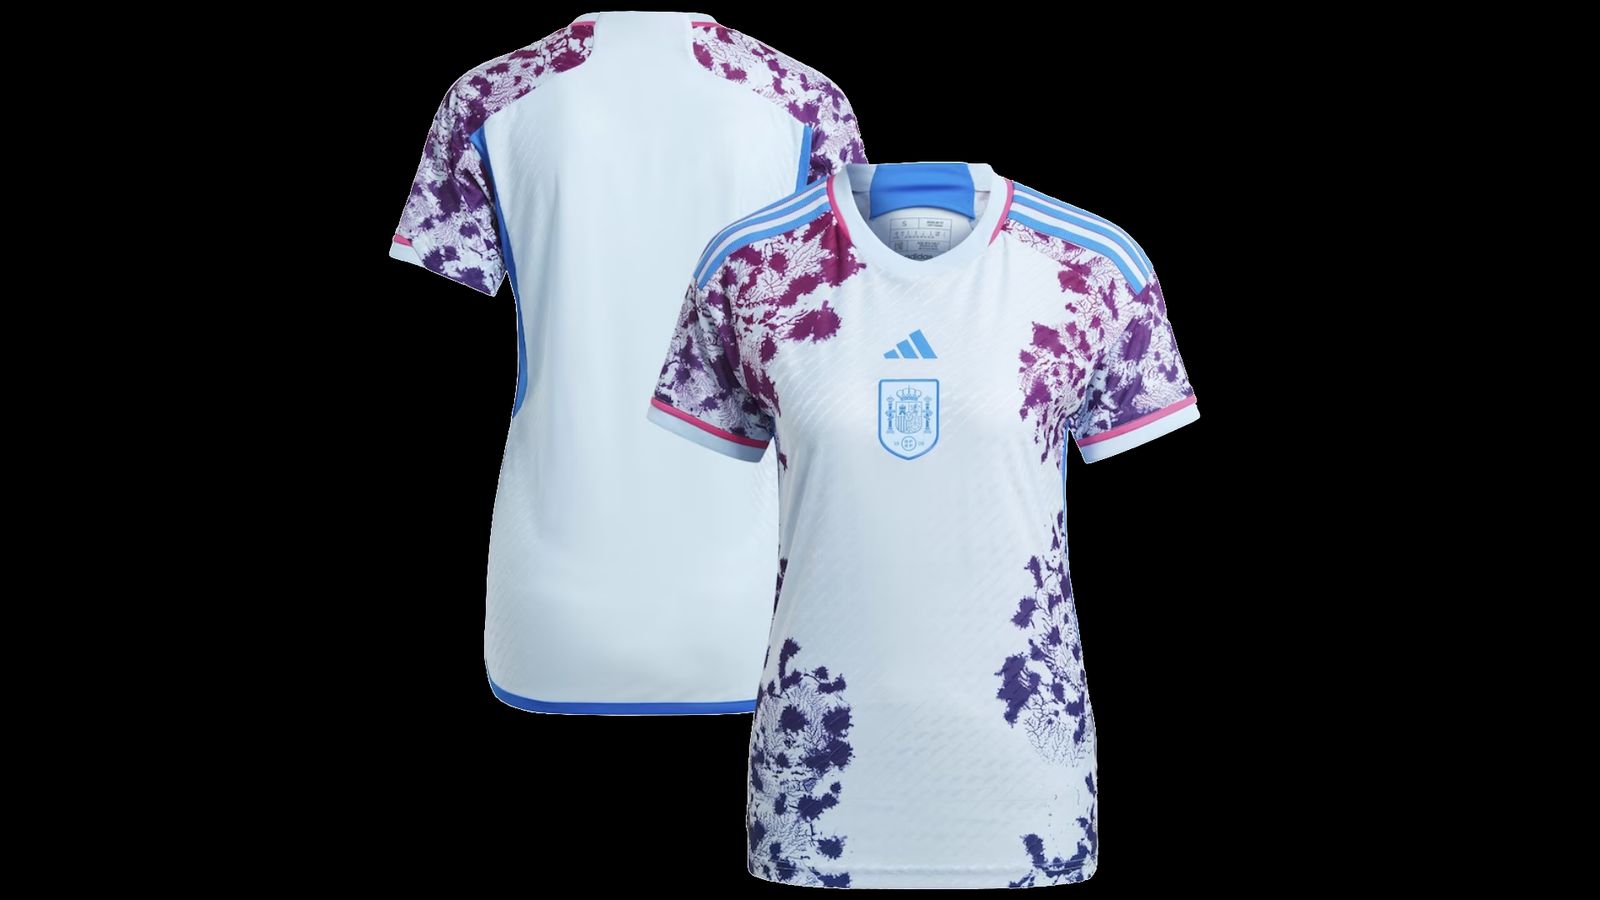 Spain adidas Women's Away kit product image of a light blue jersey featuring a purple coral reef-inspired pattern either side.